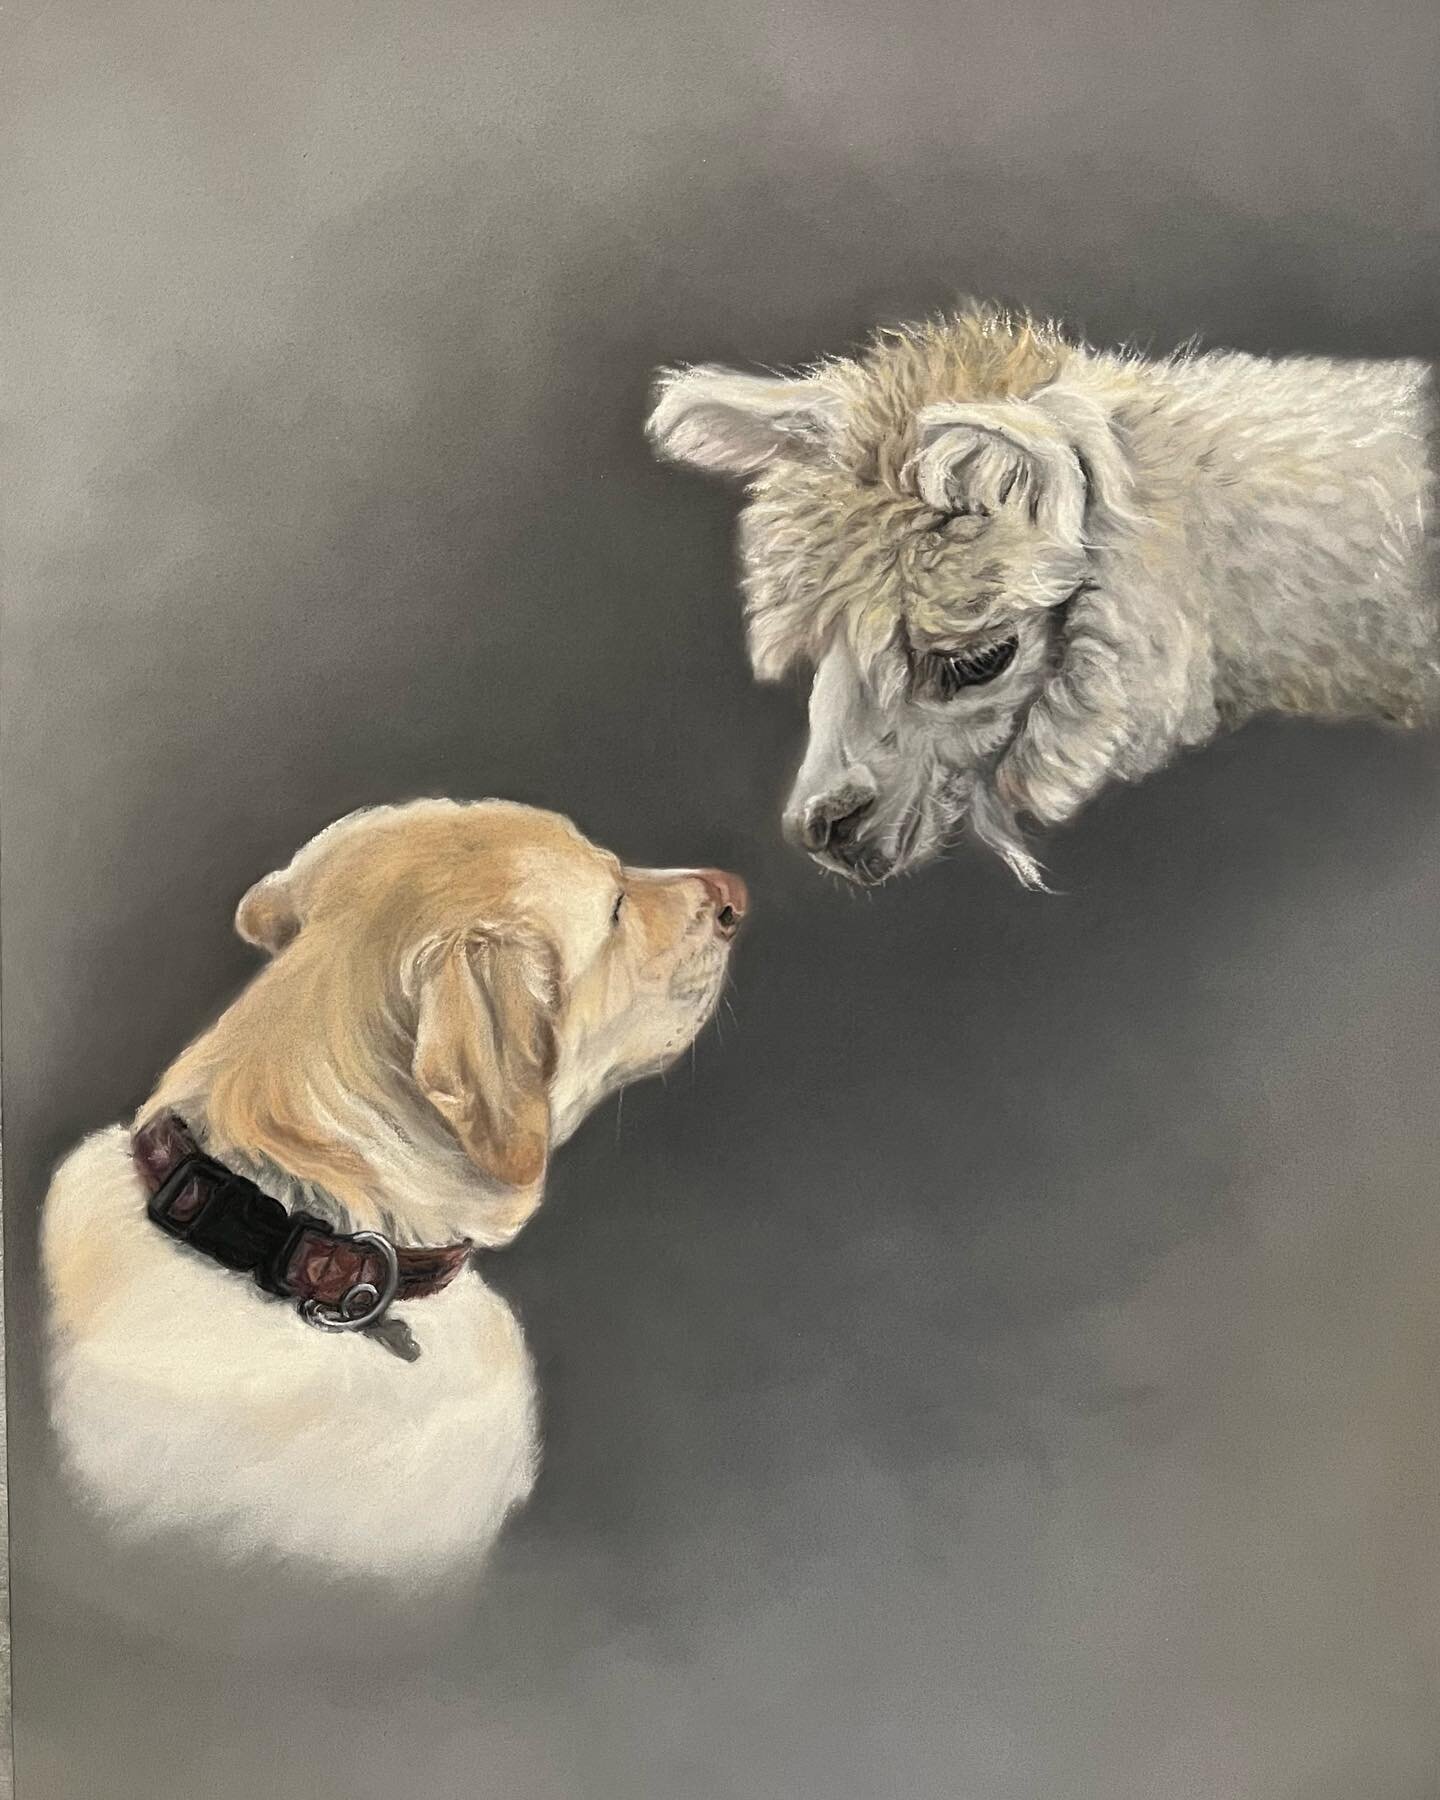 Another commission from the holidays 🥰. &ldquo;Sophie&rdquo; meeting some new friends at @hunterbrook_farms ❤️ I must admit this one brought tears to my eyes more than once 🥲 
(PS. I now offer Alpaca commissions)

9&rdquo; x 12&rdquo; Pastel on Pas